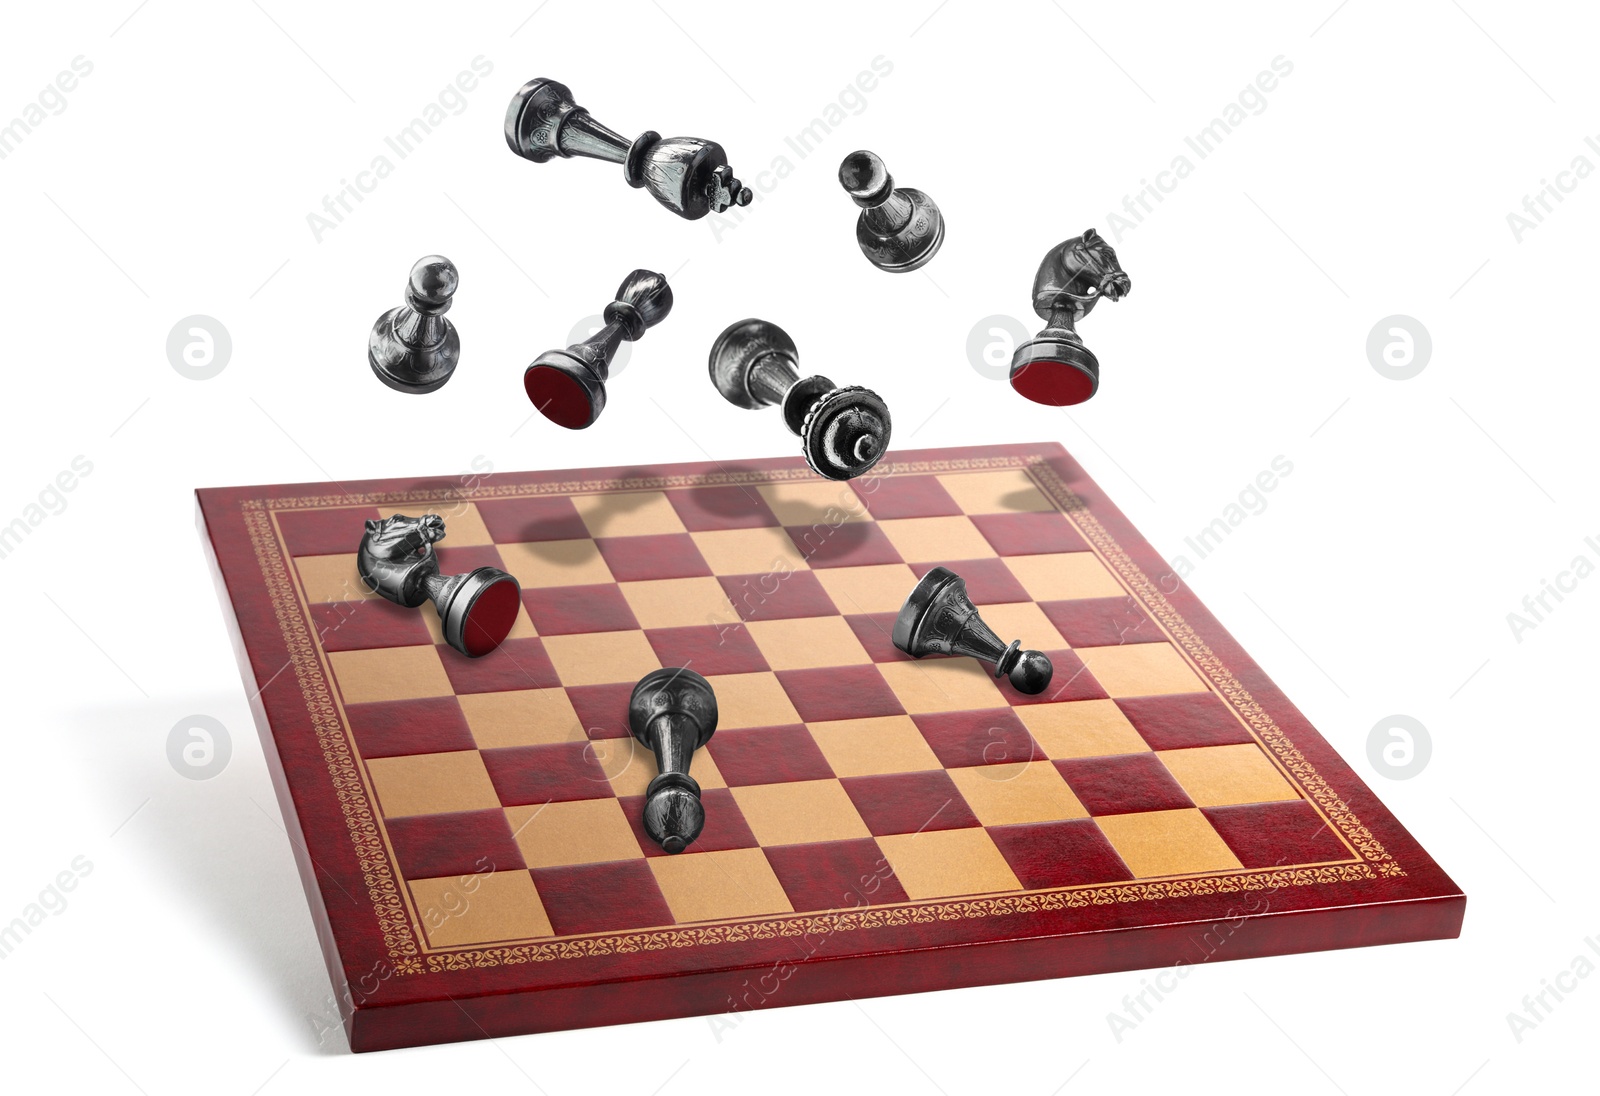 Image of Chess pieces and wooden checkerboard in air on white background